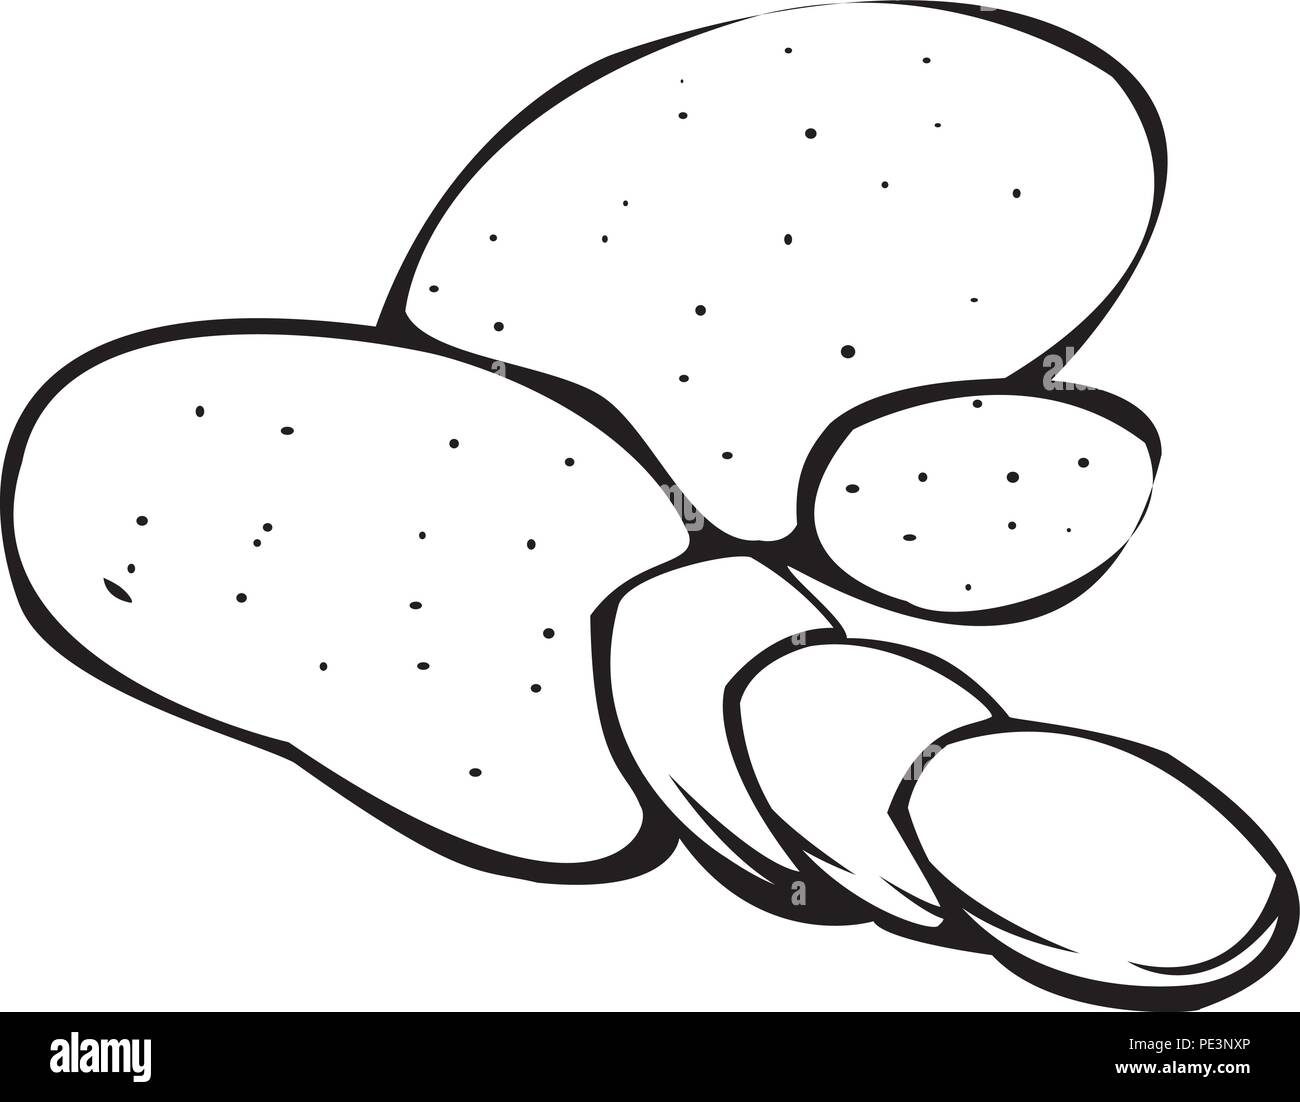 Black and white illustration of potatoes Stock Vector